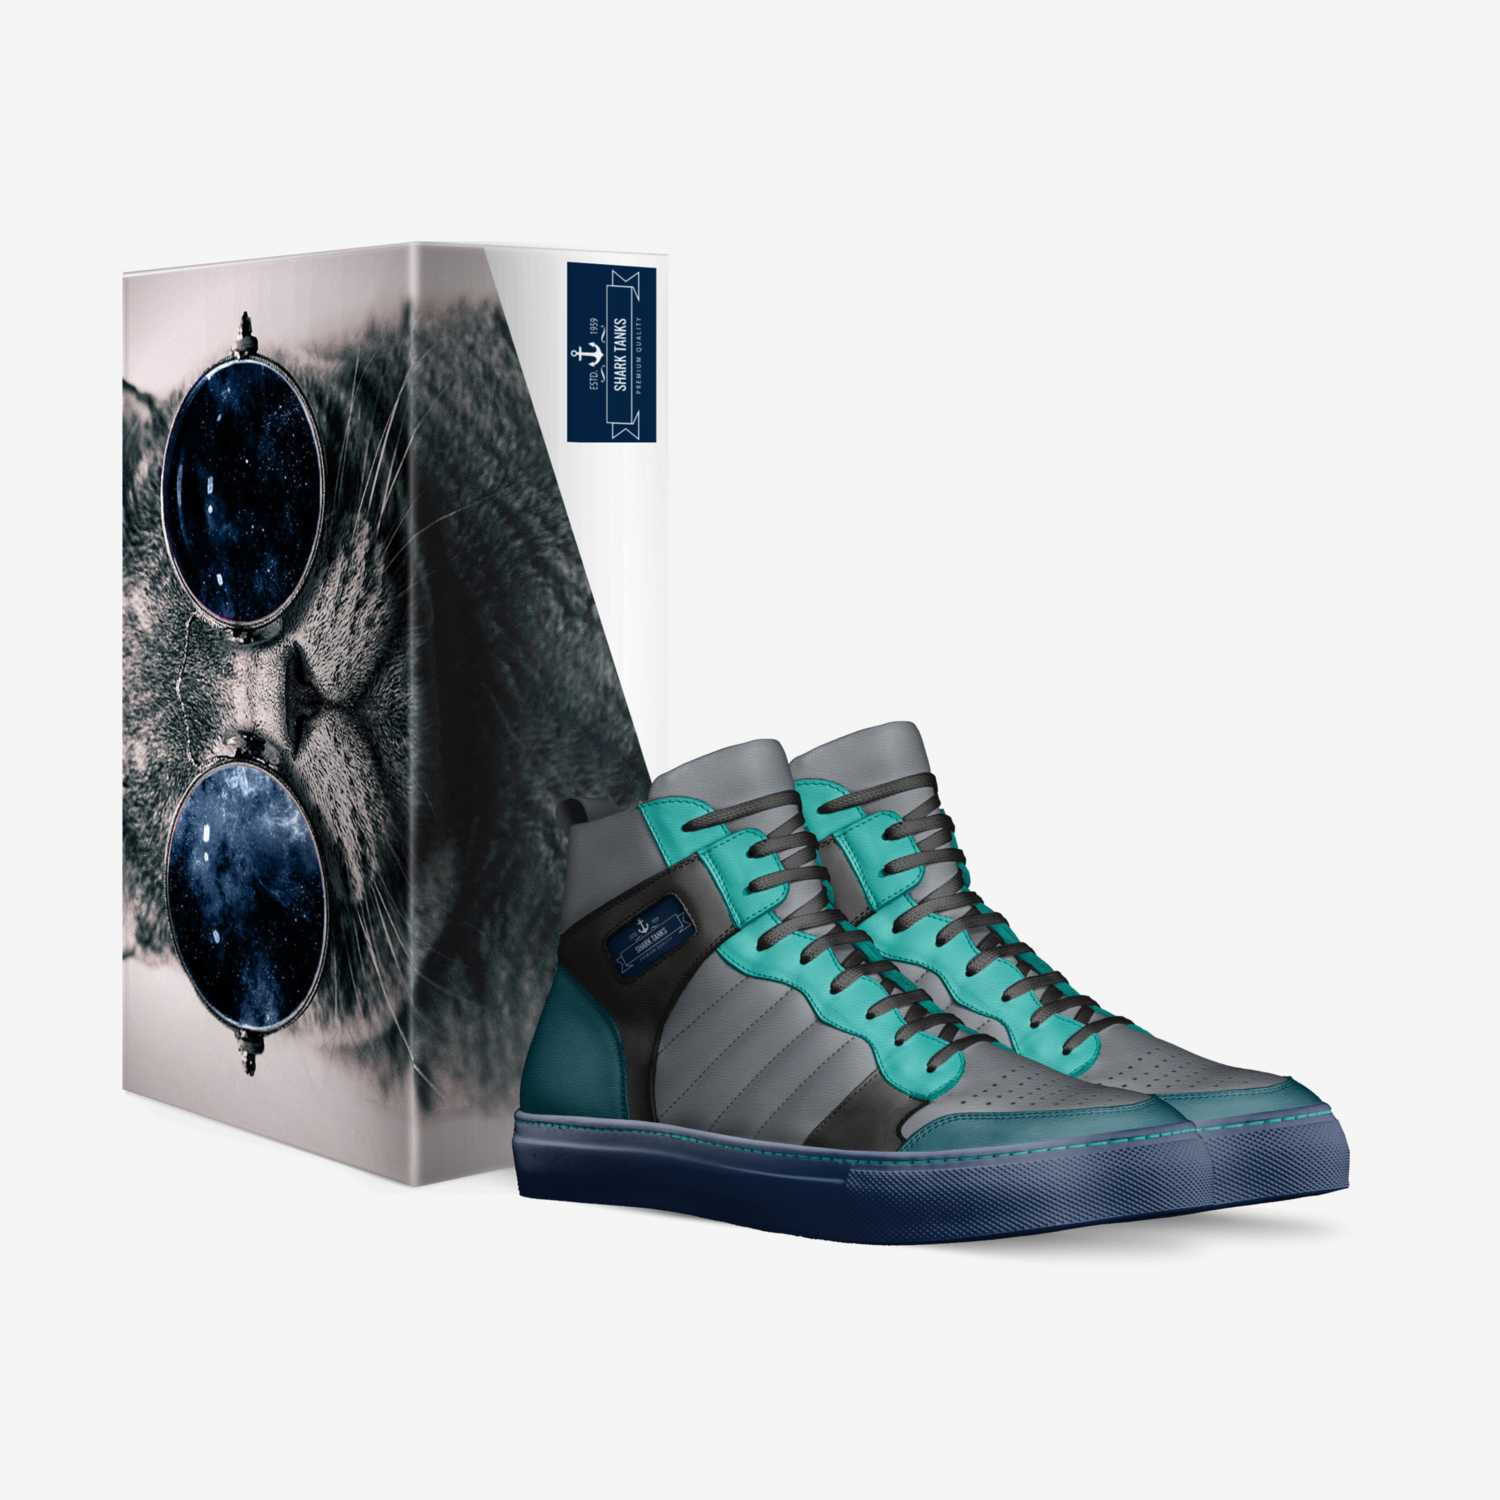 Shark tanks custom made in Italy shoes by Sabastian | Box view